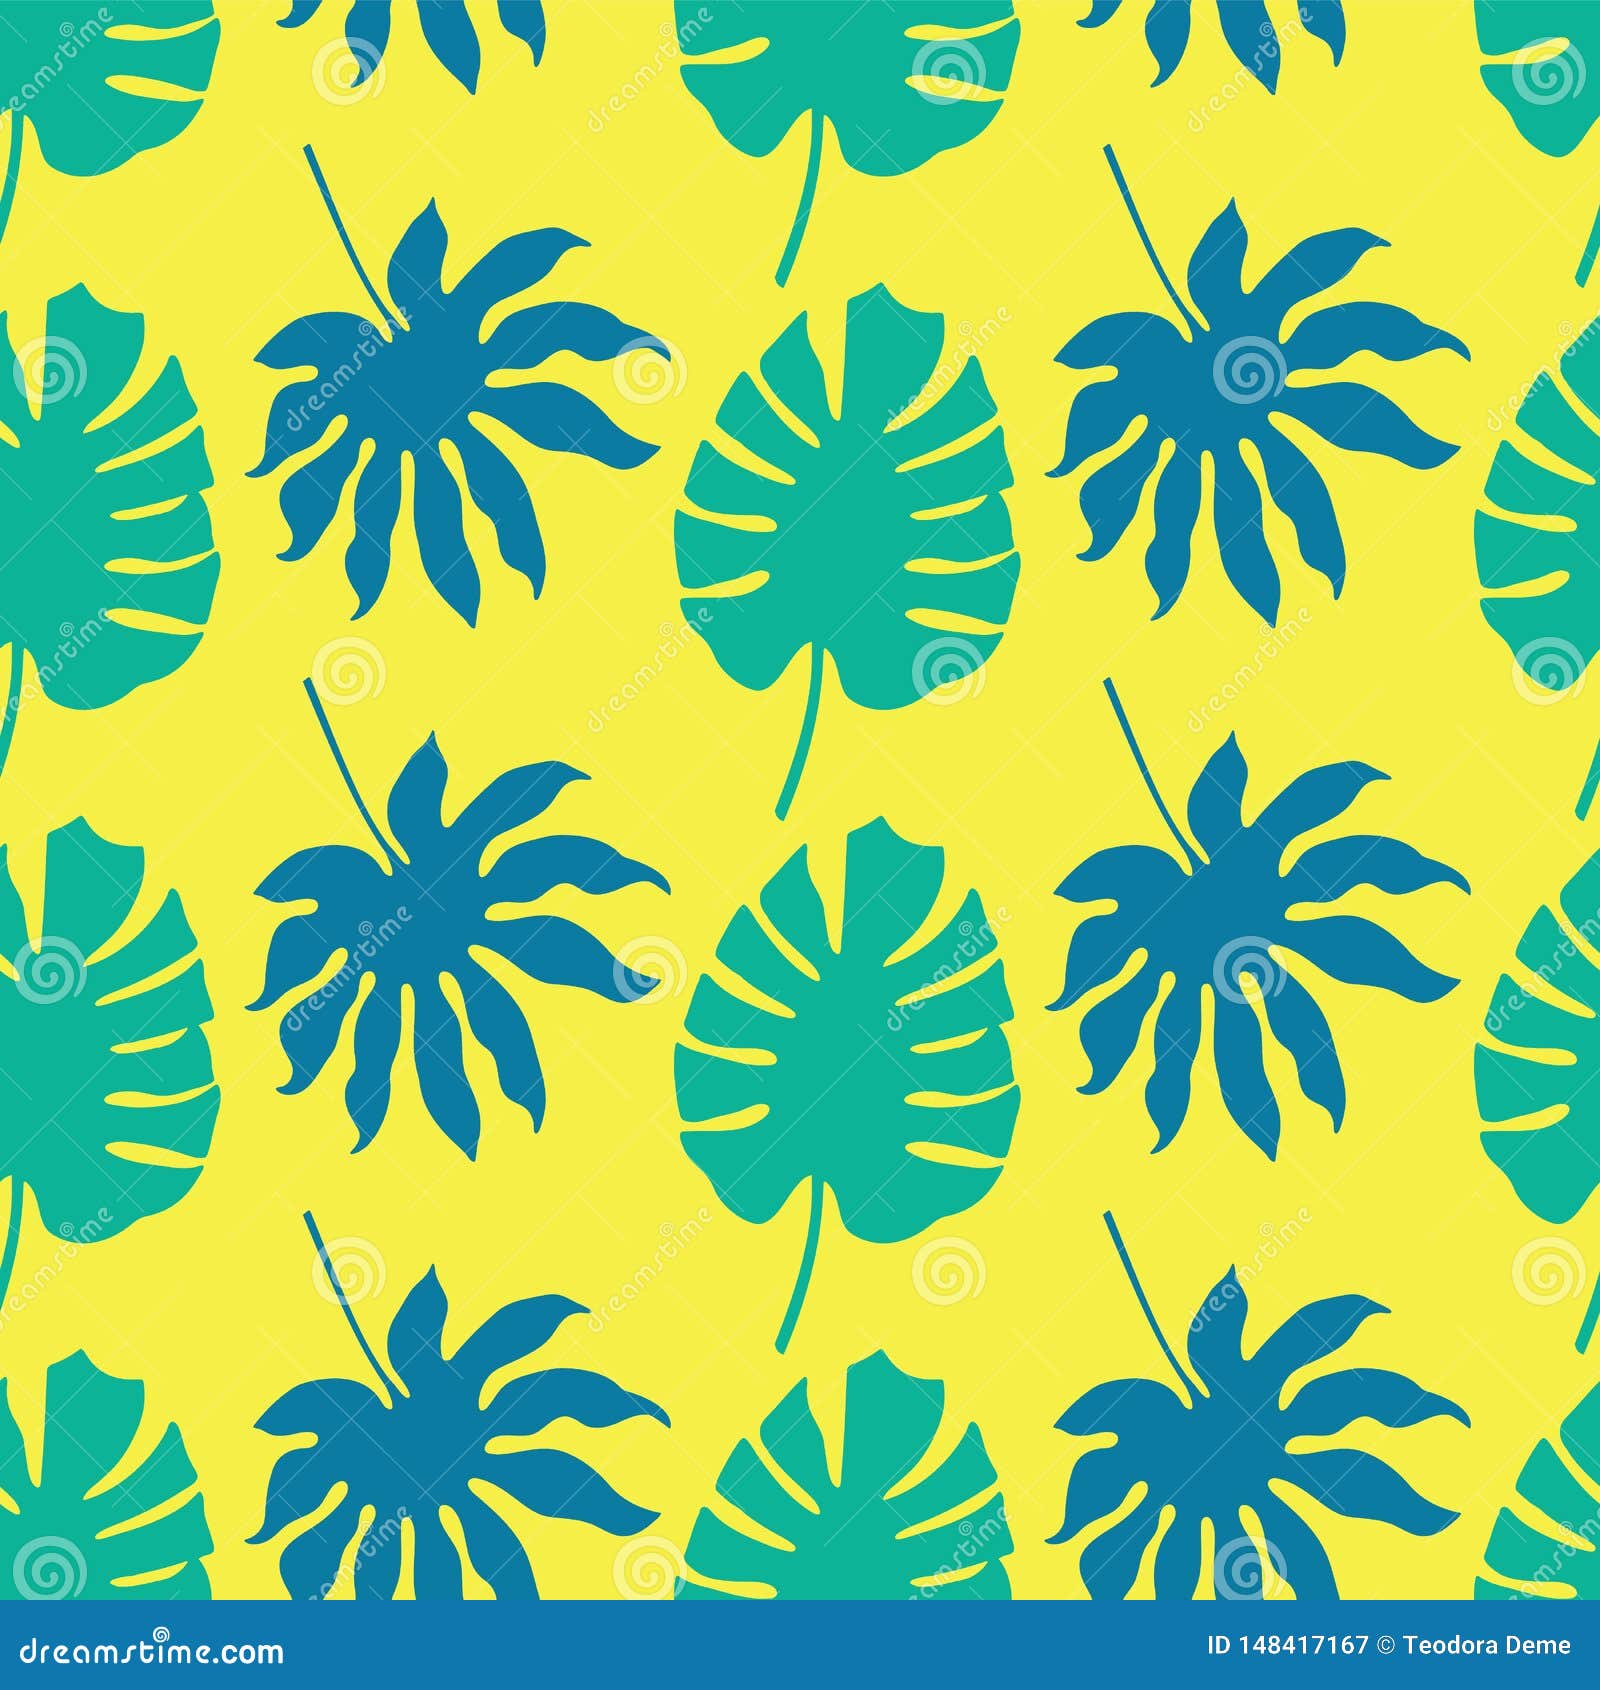 Vector Seamless Pattern Background with Green and Blue Tropical Leaves on Neon  Yellow Background Stock Vector - Illustration of branch, pattern: 148417167